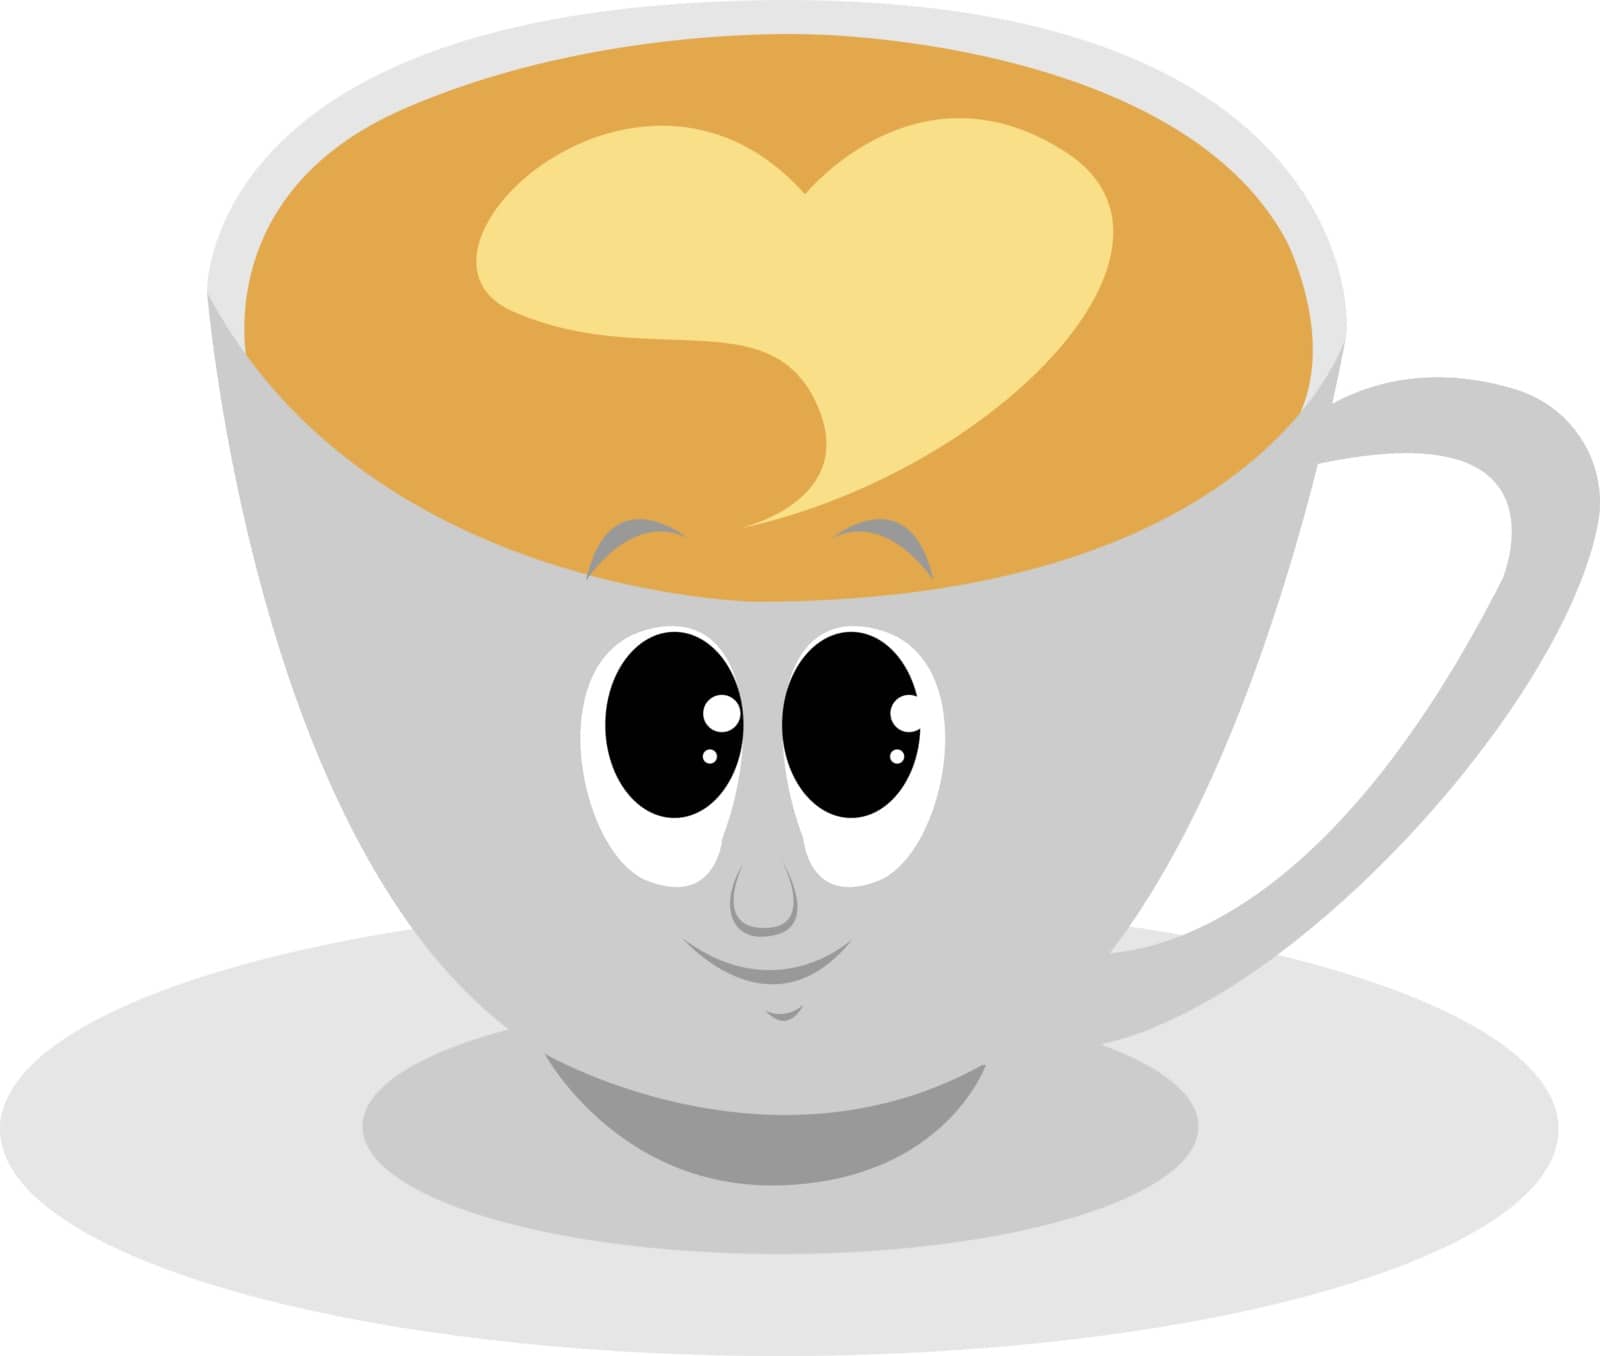 Espresso cup, illustration, vector on white background.